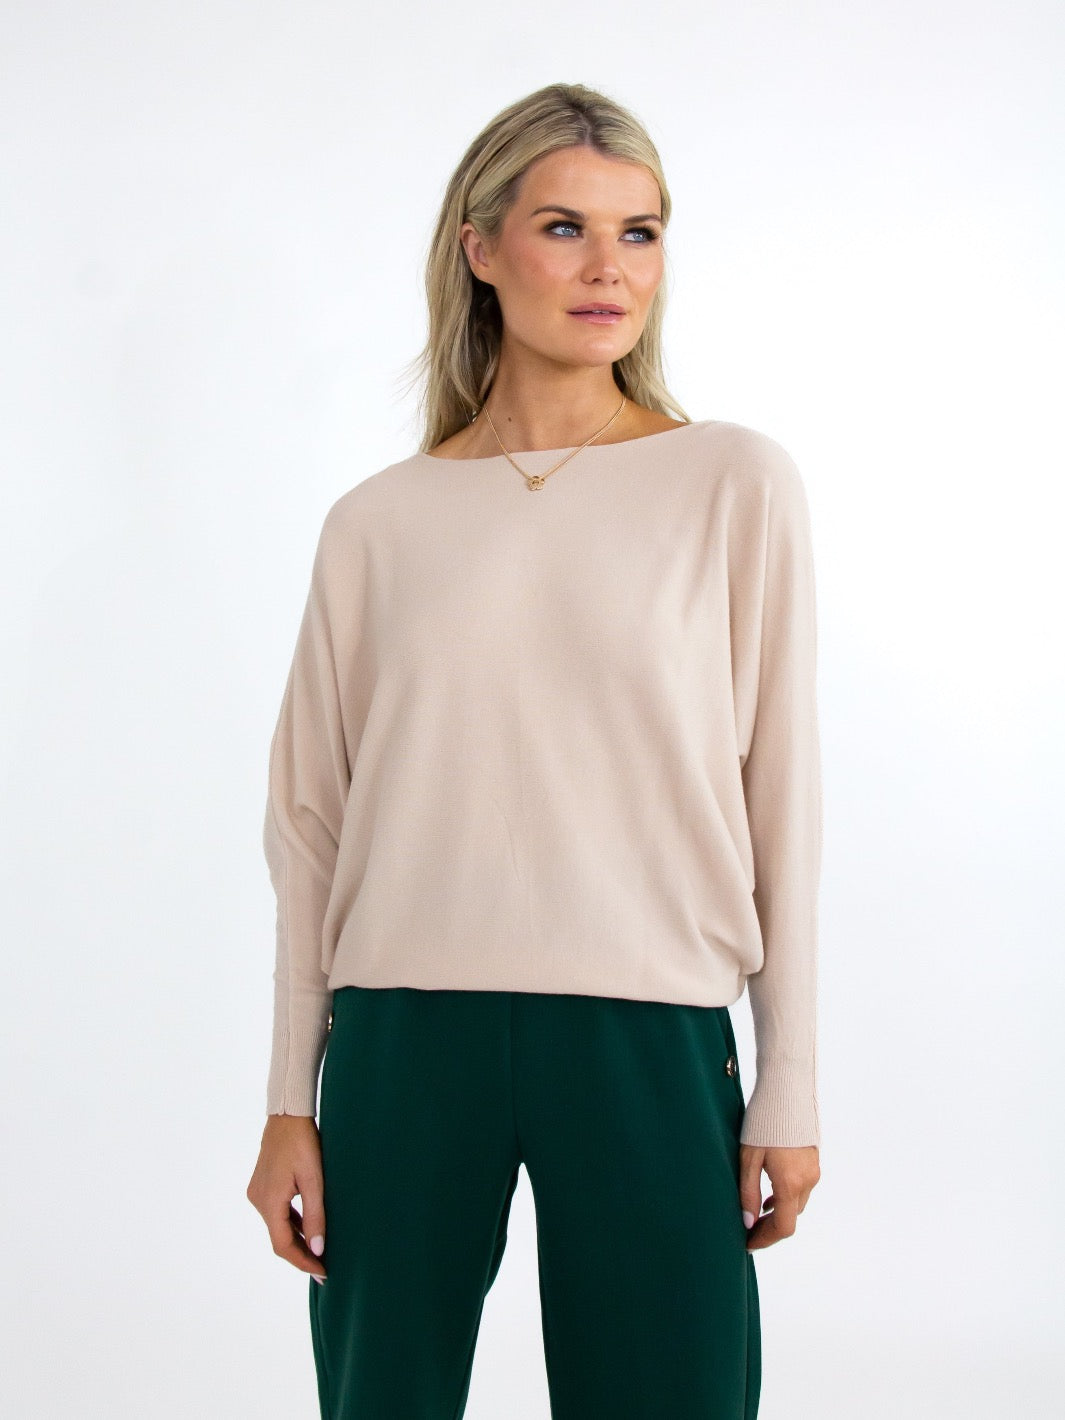 Kate & Pippa Milano Batwing Knit In Beige-Nicola Ross